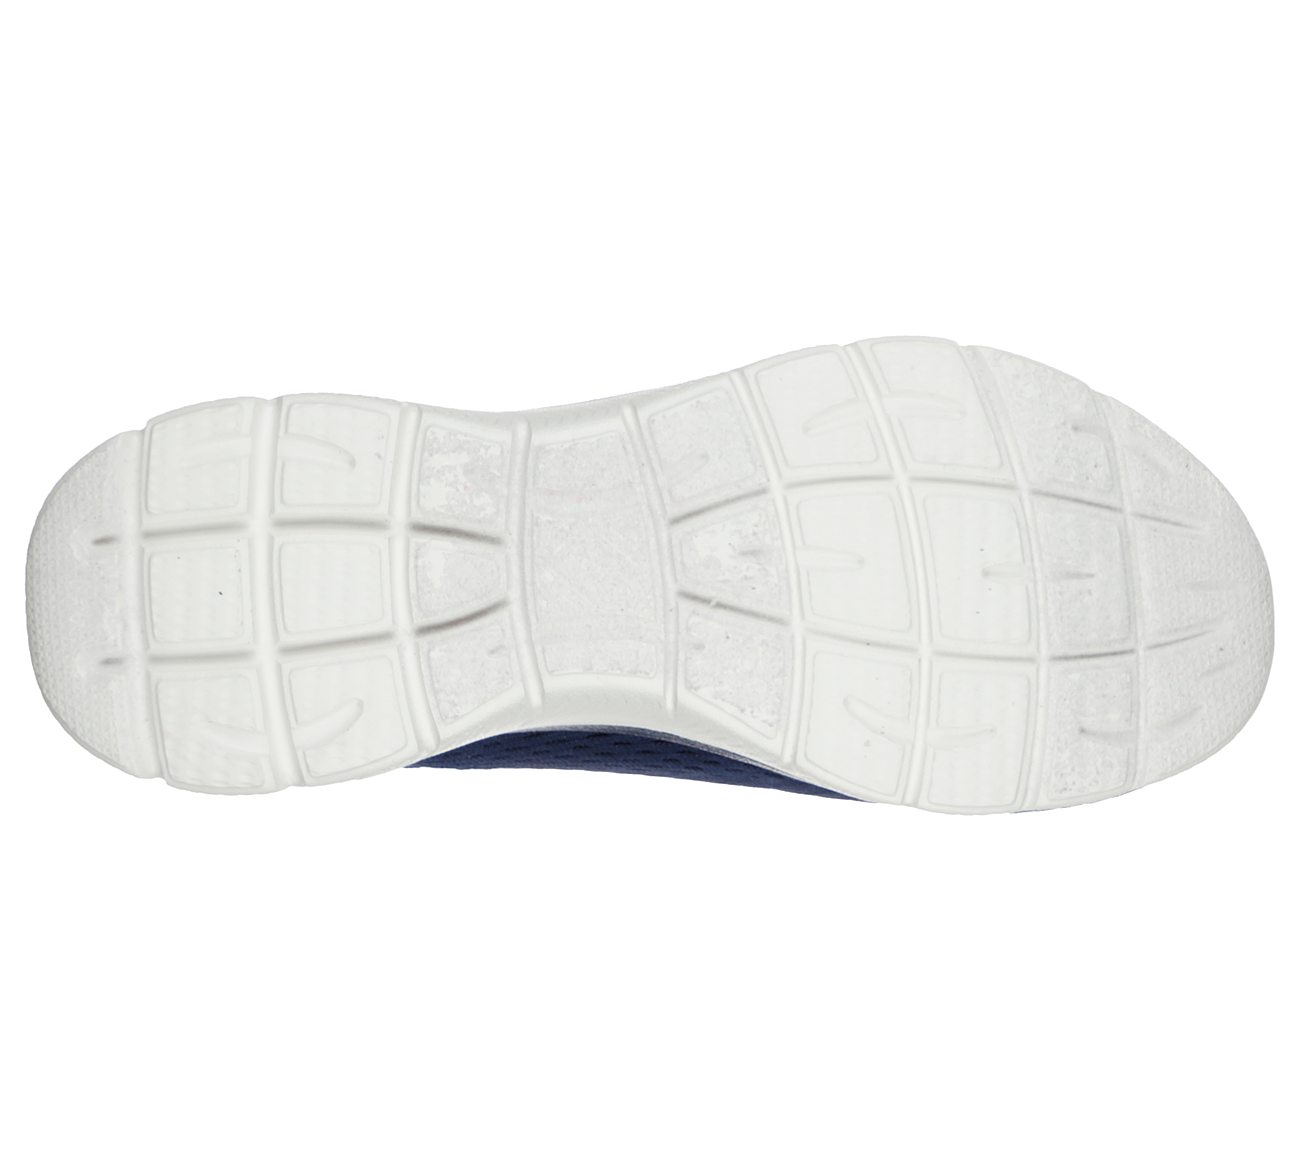 SUMMITS - FAST ATTRACTION, NAVY/CORAL Footwear Bottom View